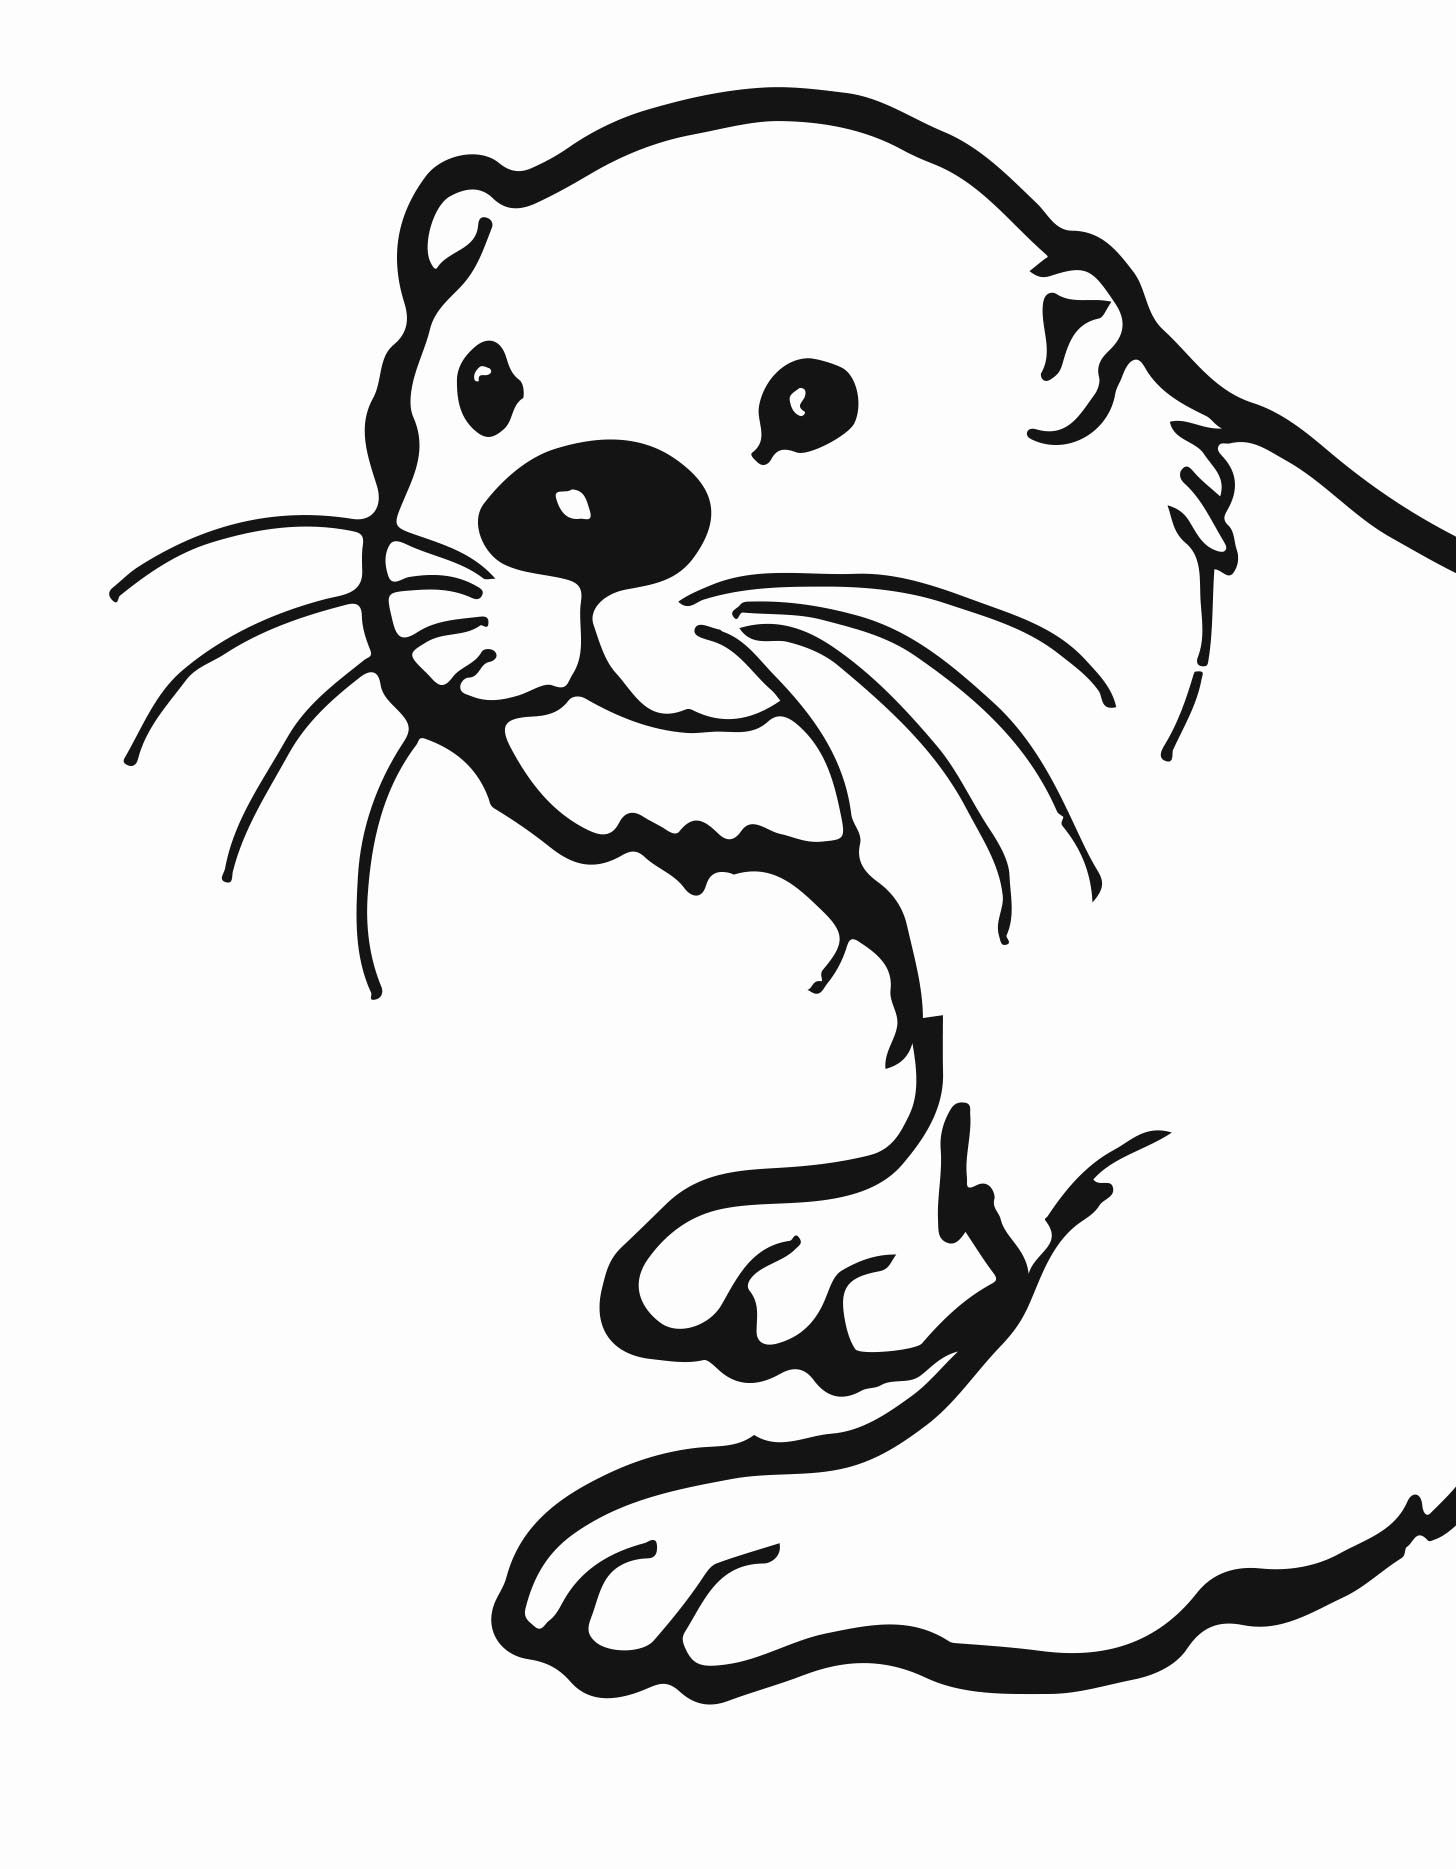 Otter clipart free.